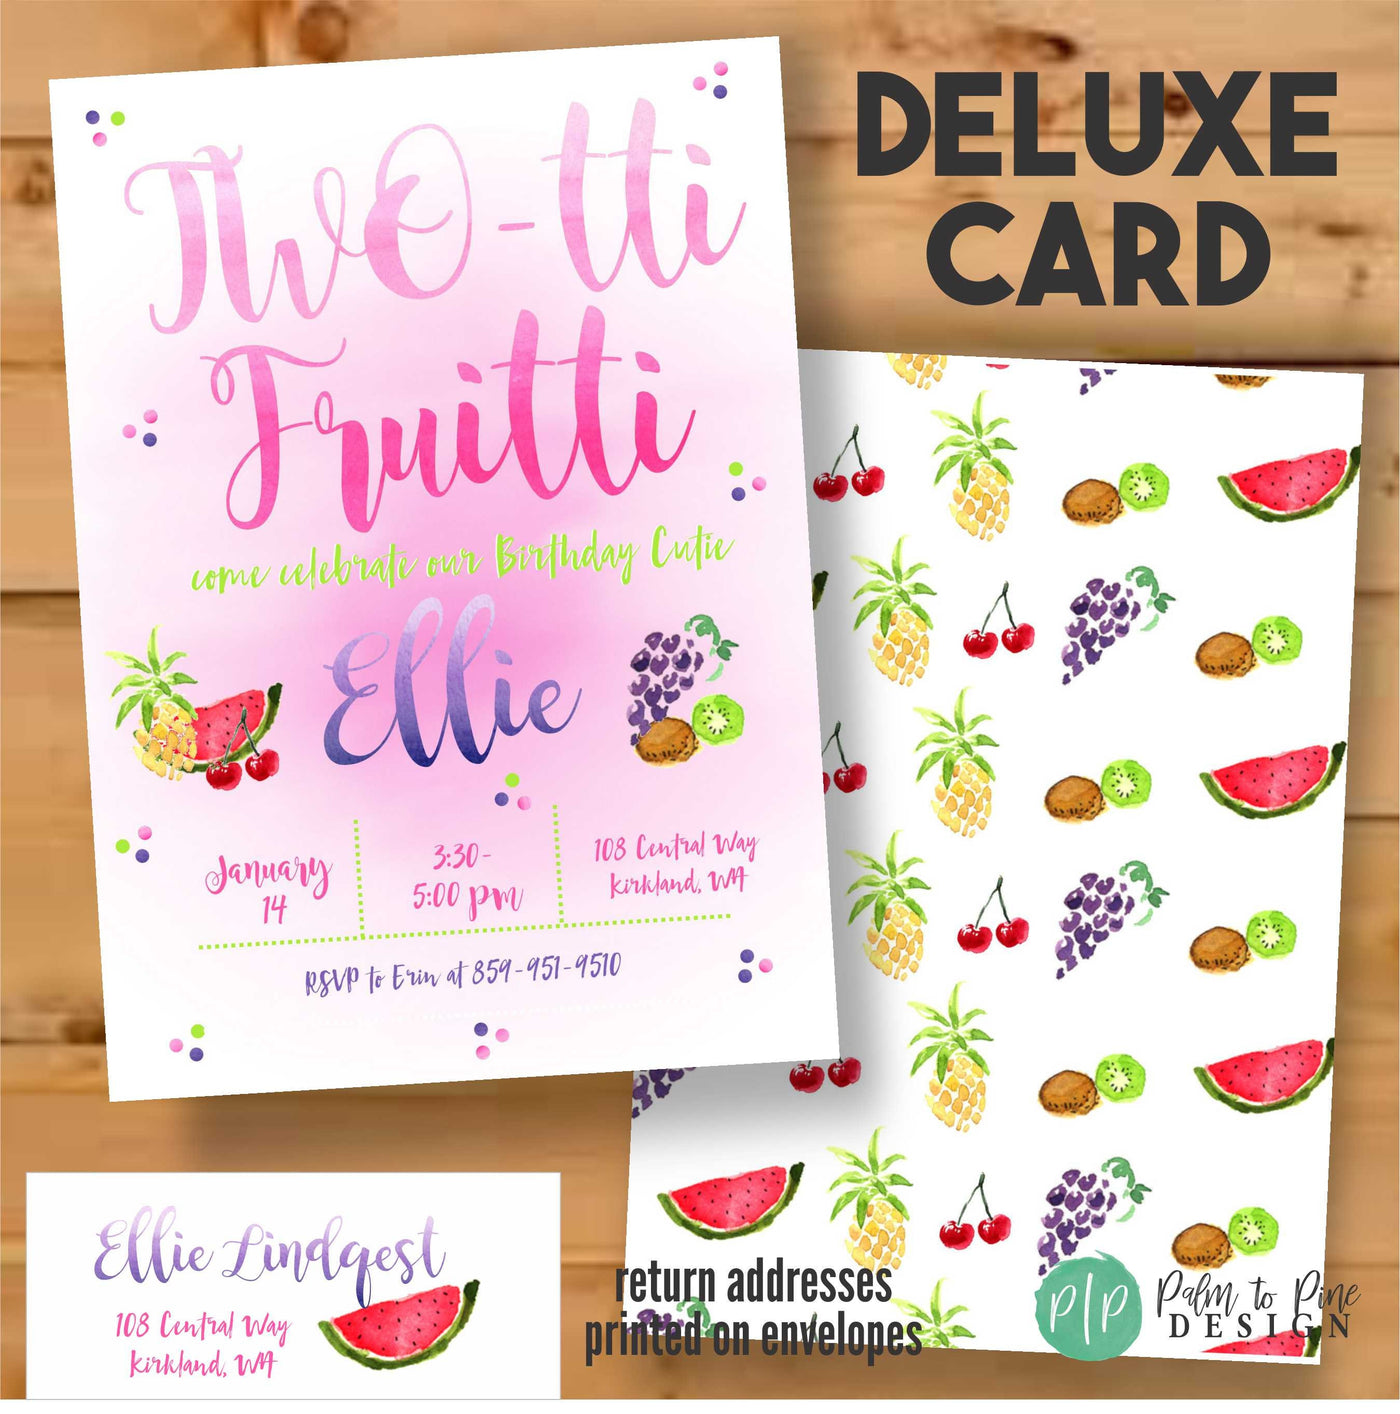 Tutti Frutti Party, Two-Tti Fruity Birthday Invite, Twotti Frutti Invitation, Twotti Fruitti Birthday, Second Birthday,Watercolor Fruit, 2nd